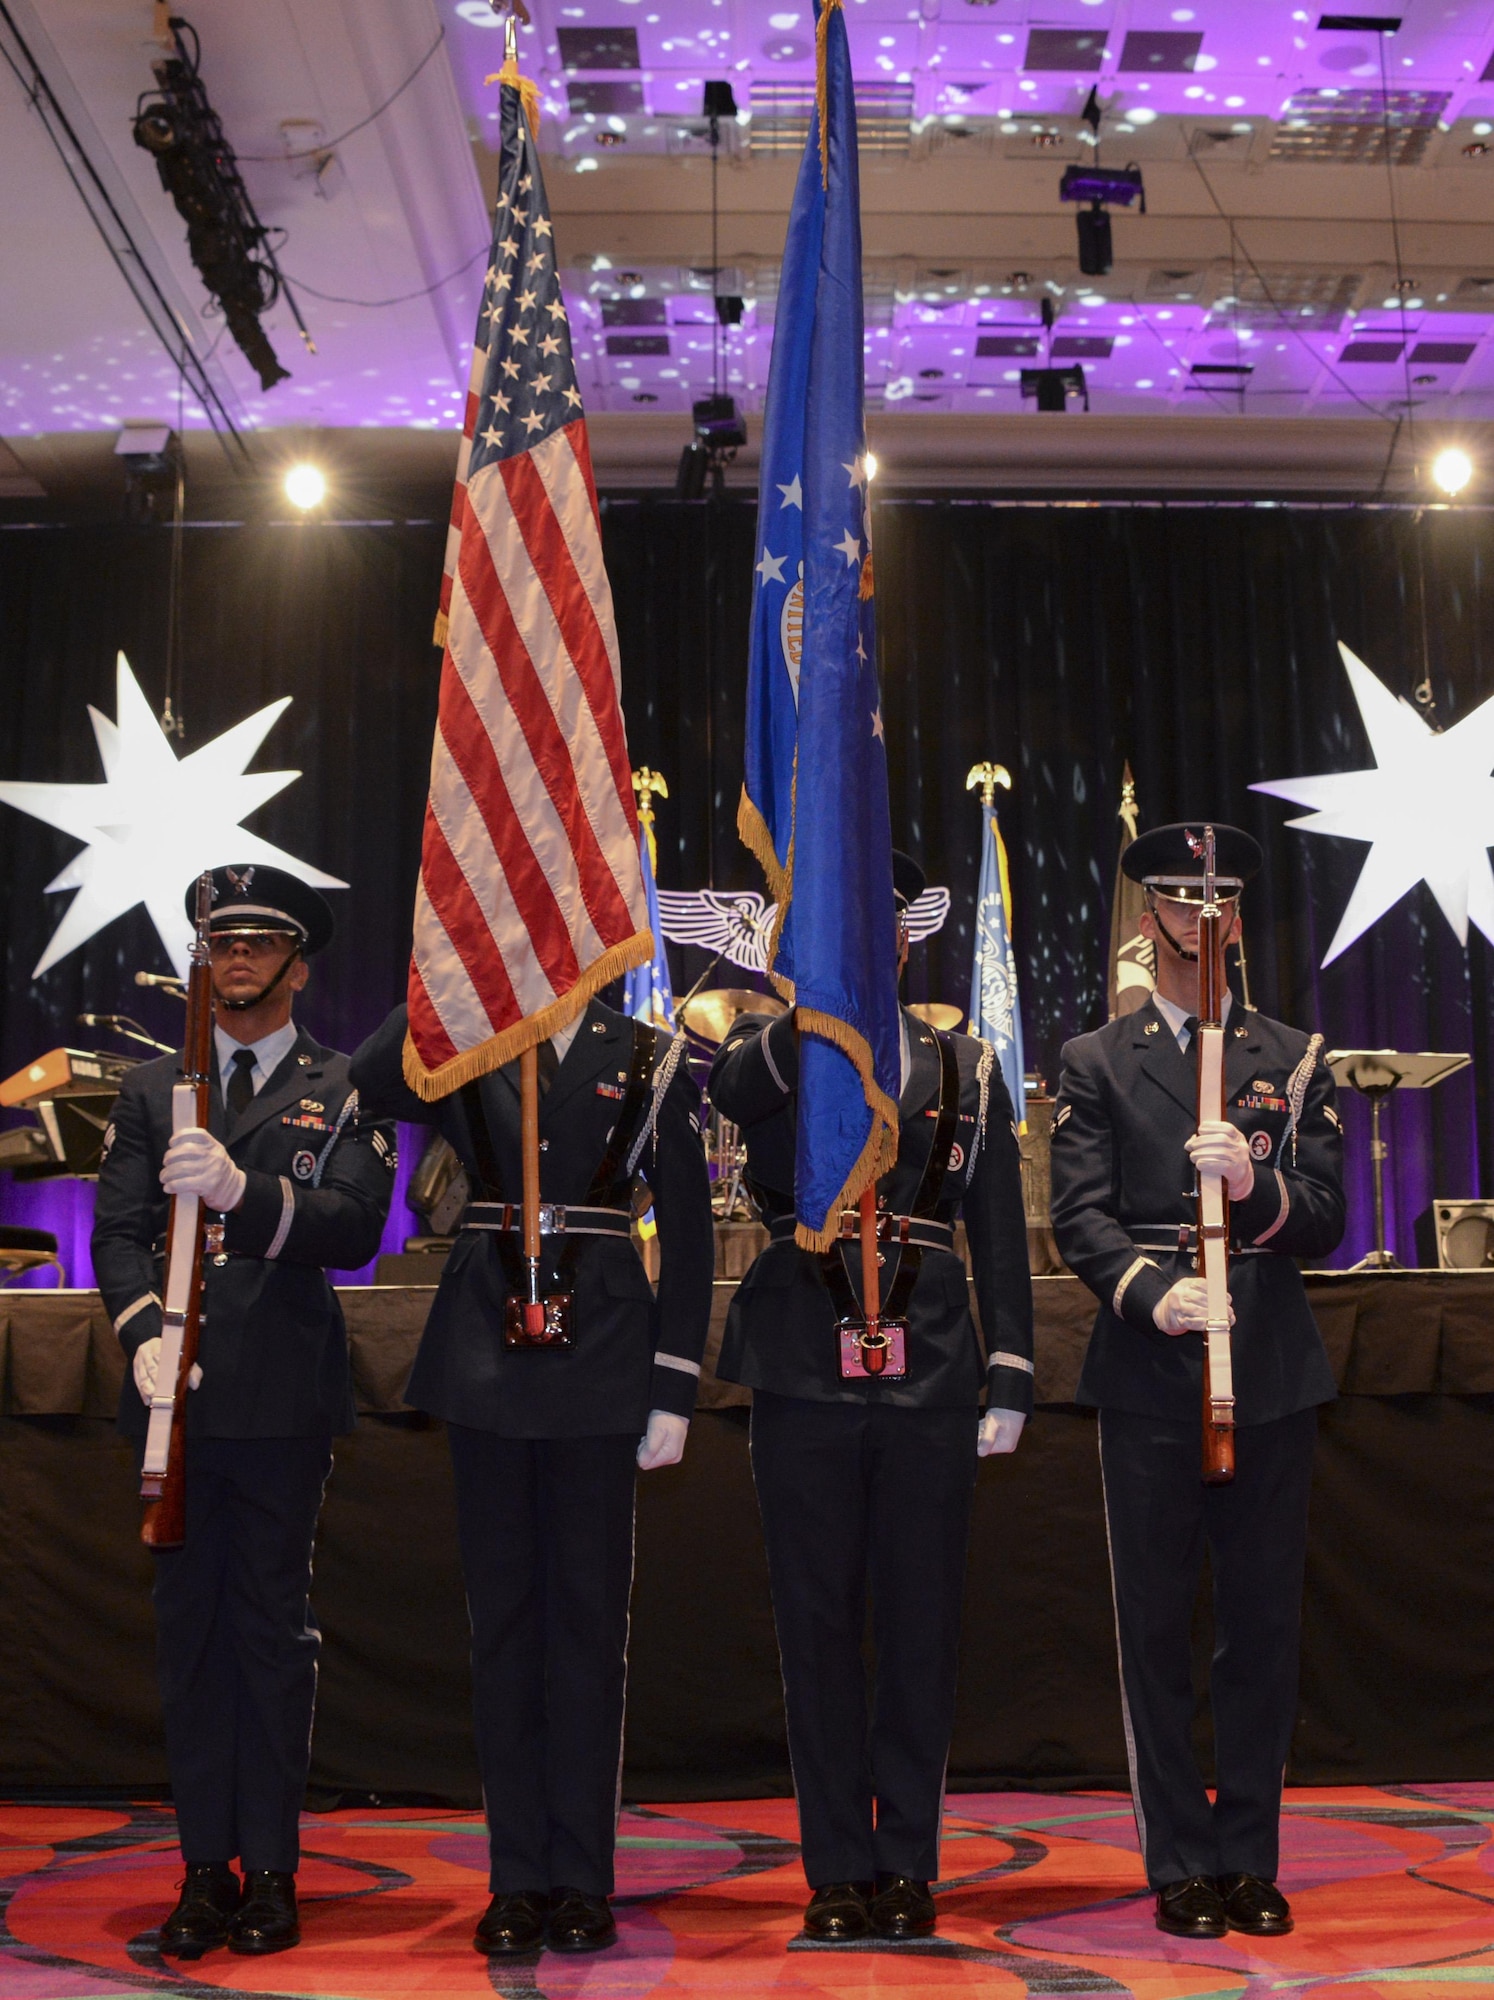 The Honor Guard from Travis Air Force Base, Calif., present the colors at the Air Force Sergeants Association International Convention in Reno, Nevada. This signified the beginning of the Air Force Honors Banquet, which was the final event for the Professional Airmen's Conference. (U.S. Air Force photo by Senior Airman Amber Carter)